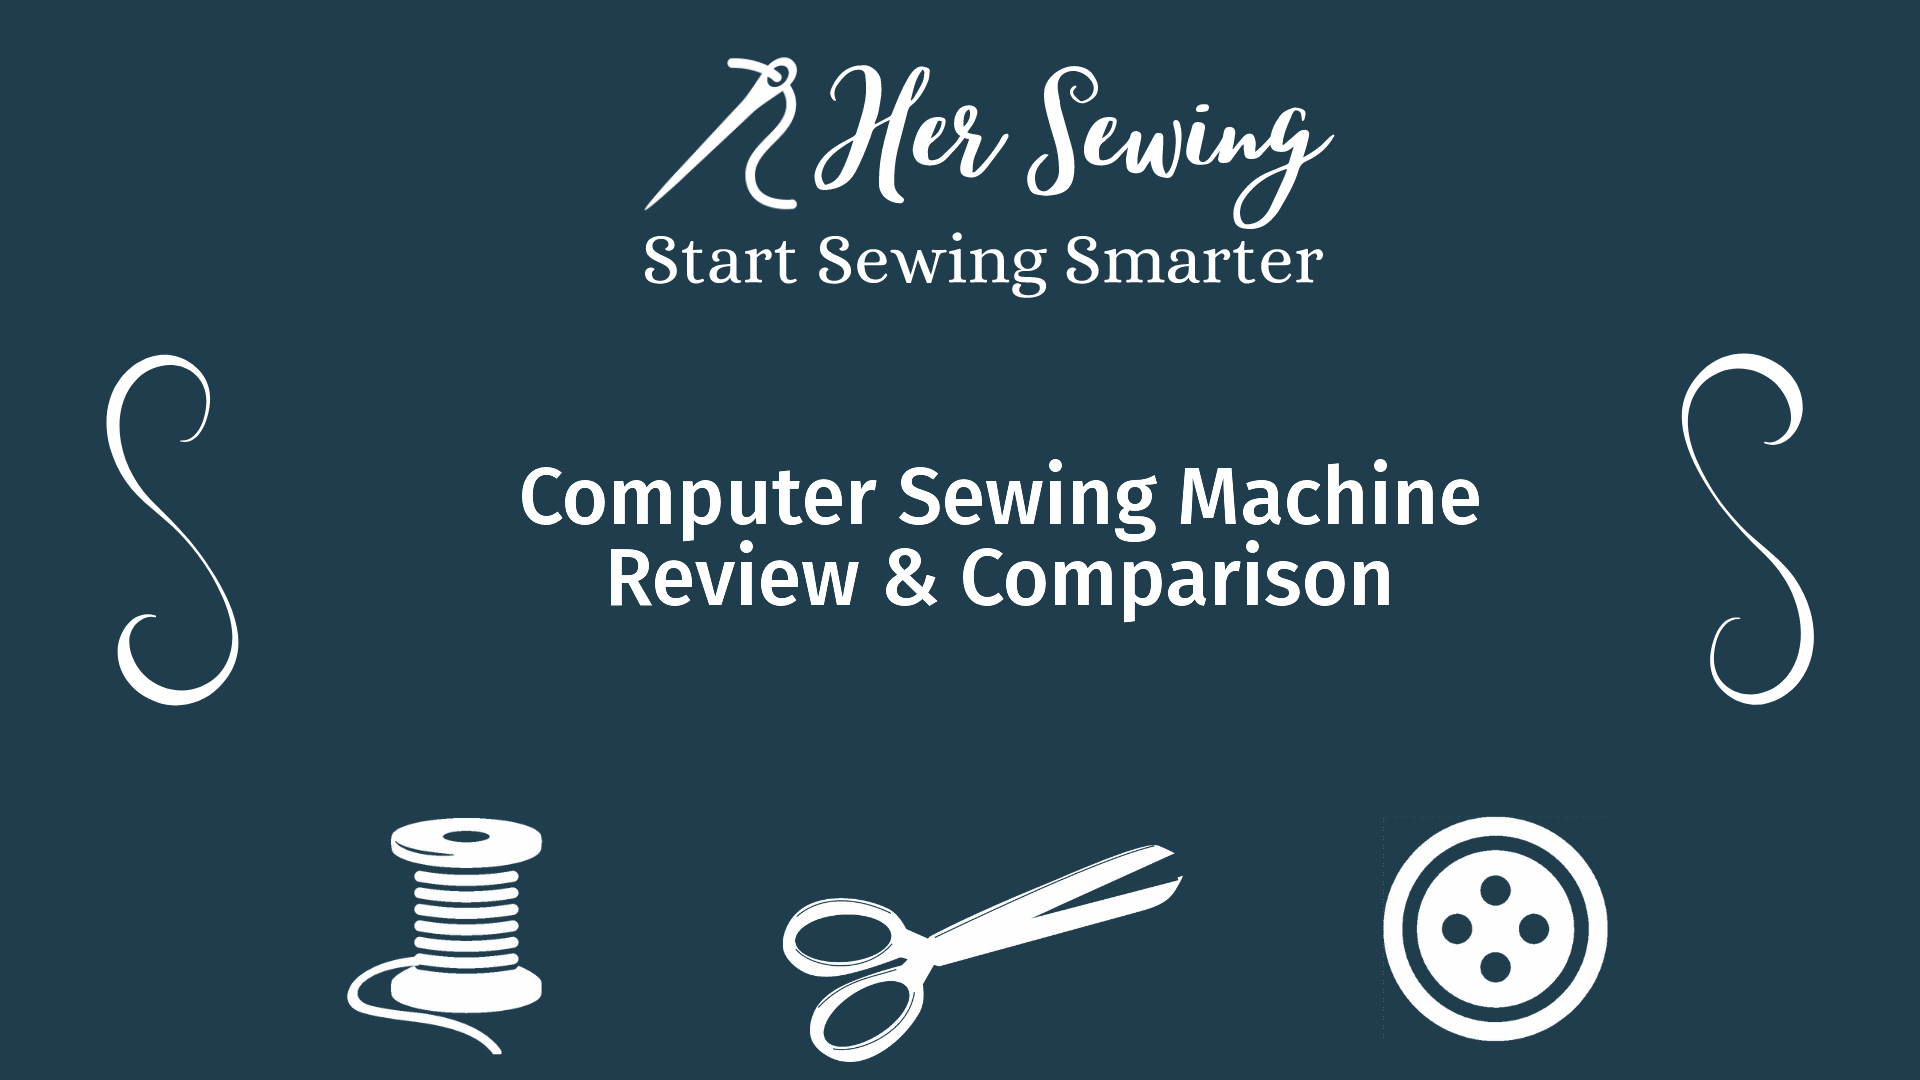 Computer Sewing Machine Review & Comparison